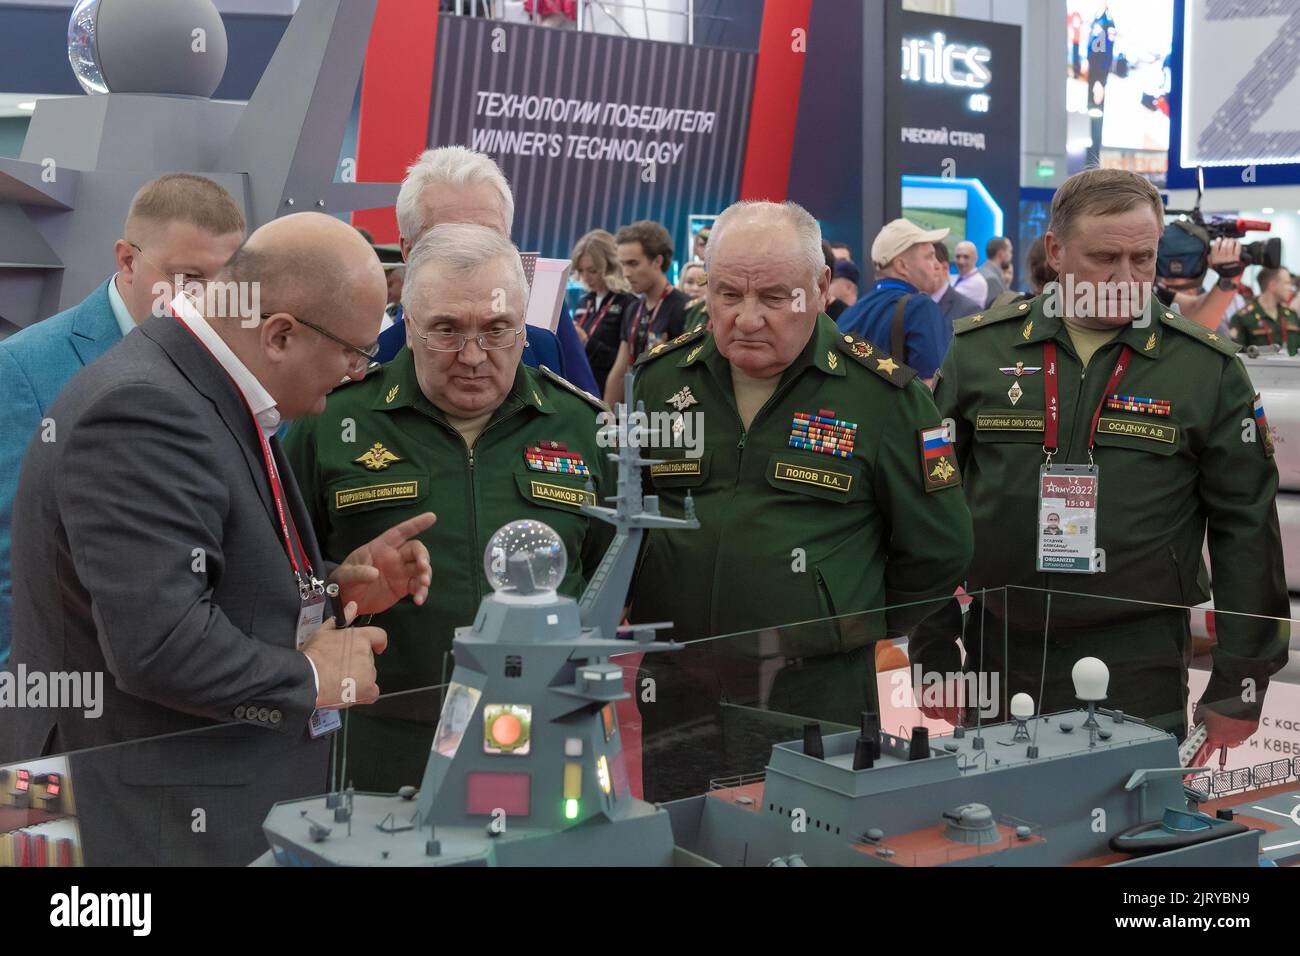 MOSCOW REGION, RUSSIA - AUGUST 18, 2022: First Deputy Minister of Defense of the Russian Federation Actual State Counselor R. Kh. Tsalikov and Deputy Stock Photo